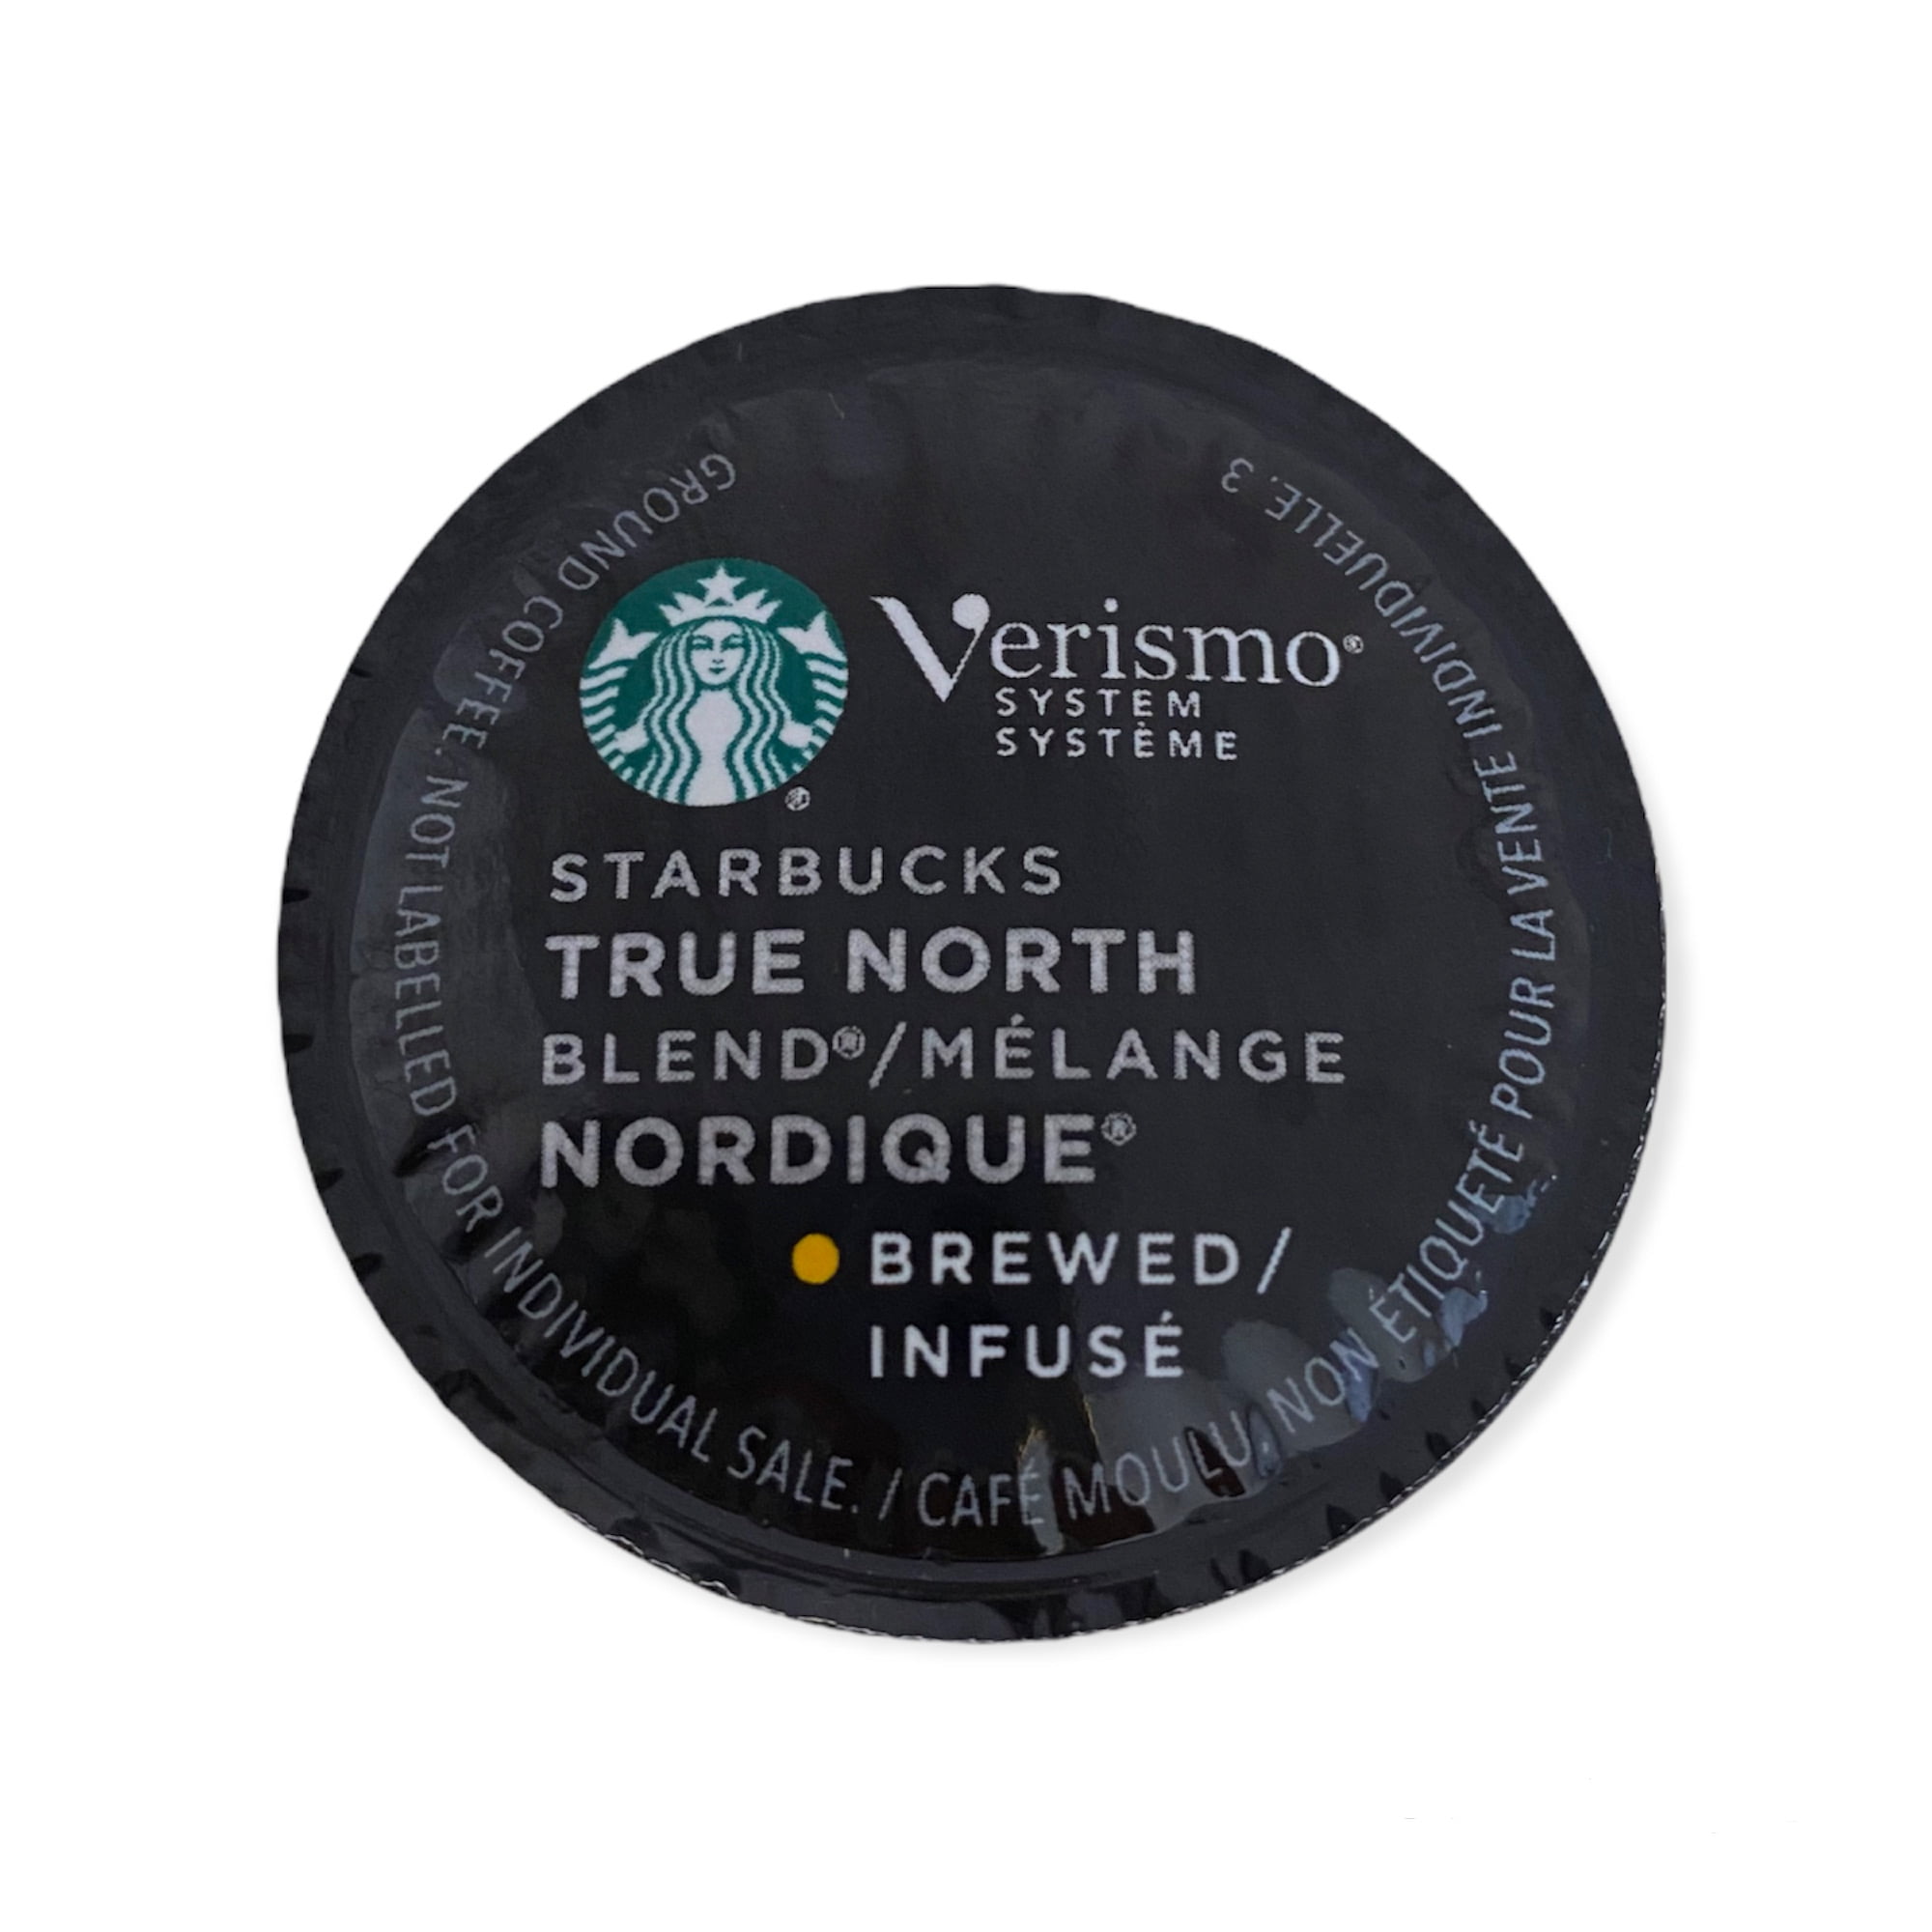 Starbuck's | VERISMO True North Nordique - Brewed Coffee, Blonde Roast,  100% Arabica Coffee, Hints of Cocoa & Toasted Nuts | Box of (12) Single-Use